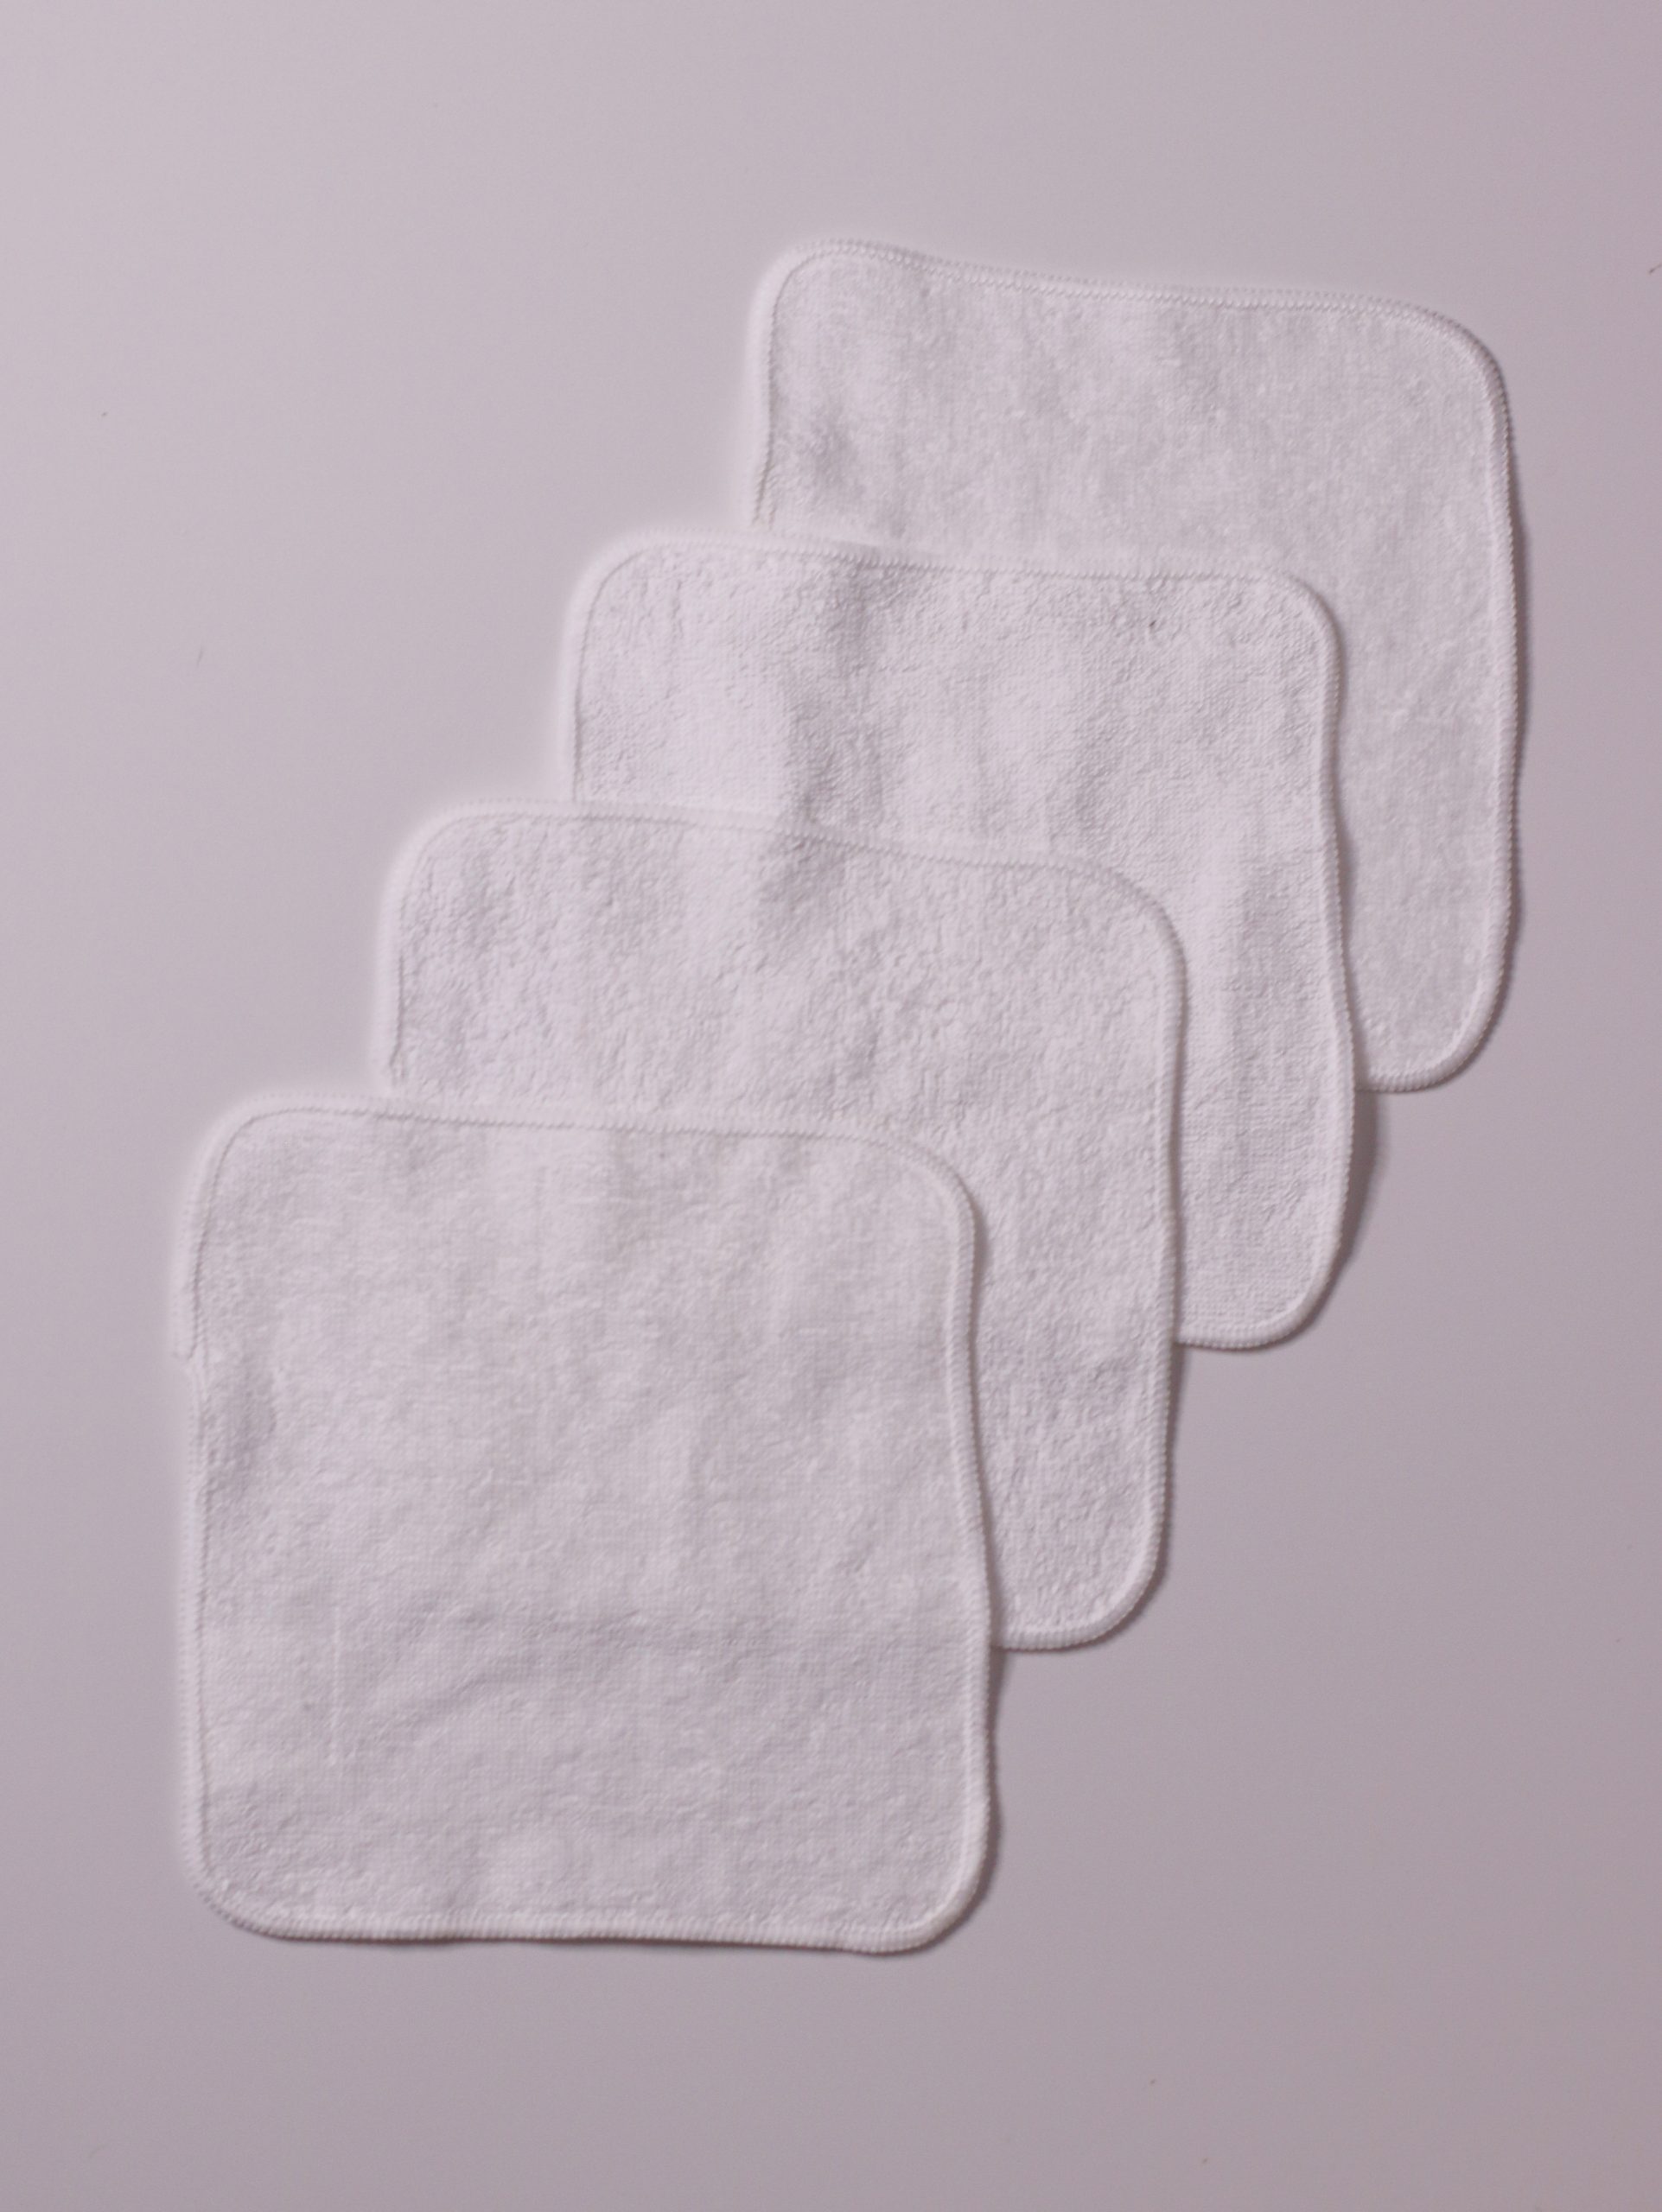 4 Pieces White Wash Cloth for Baby Quick-Dry Washcloths, Highly Absorbent,  Soft Feel Fingertip Towels, Premium Quality Flannel Face Cloths